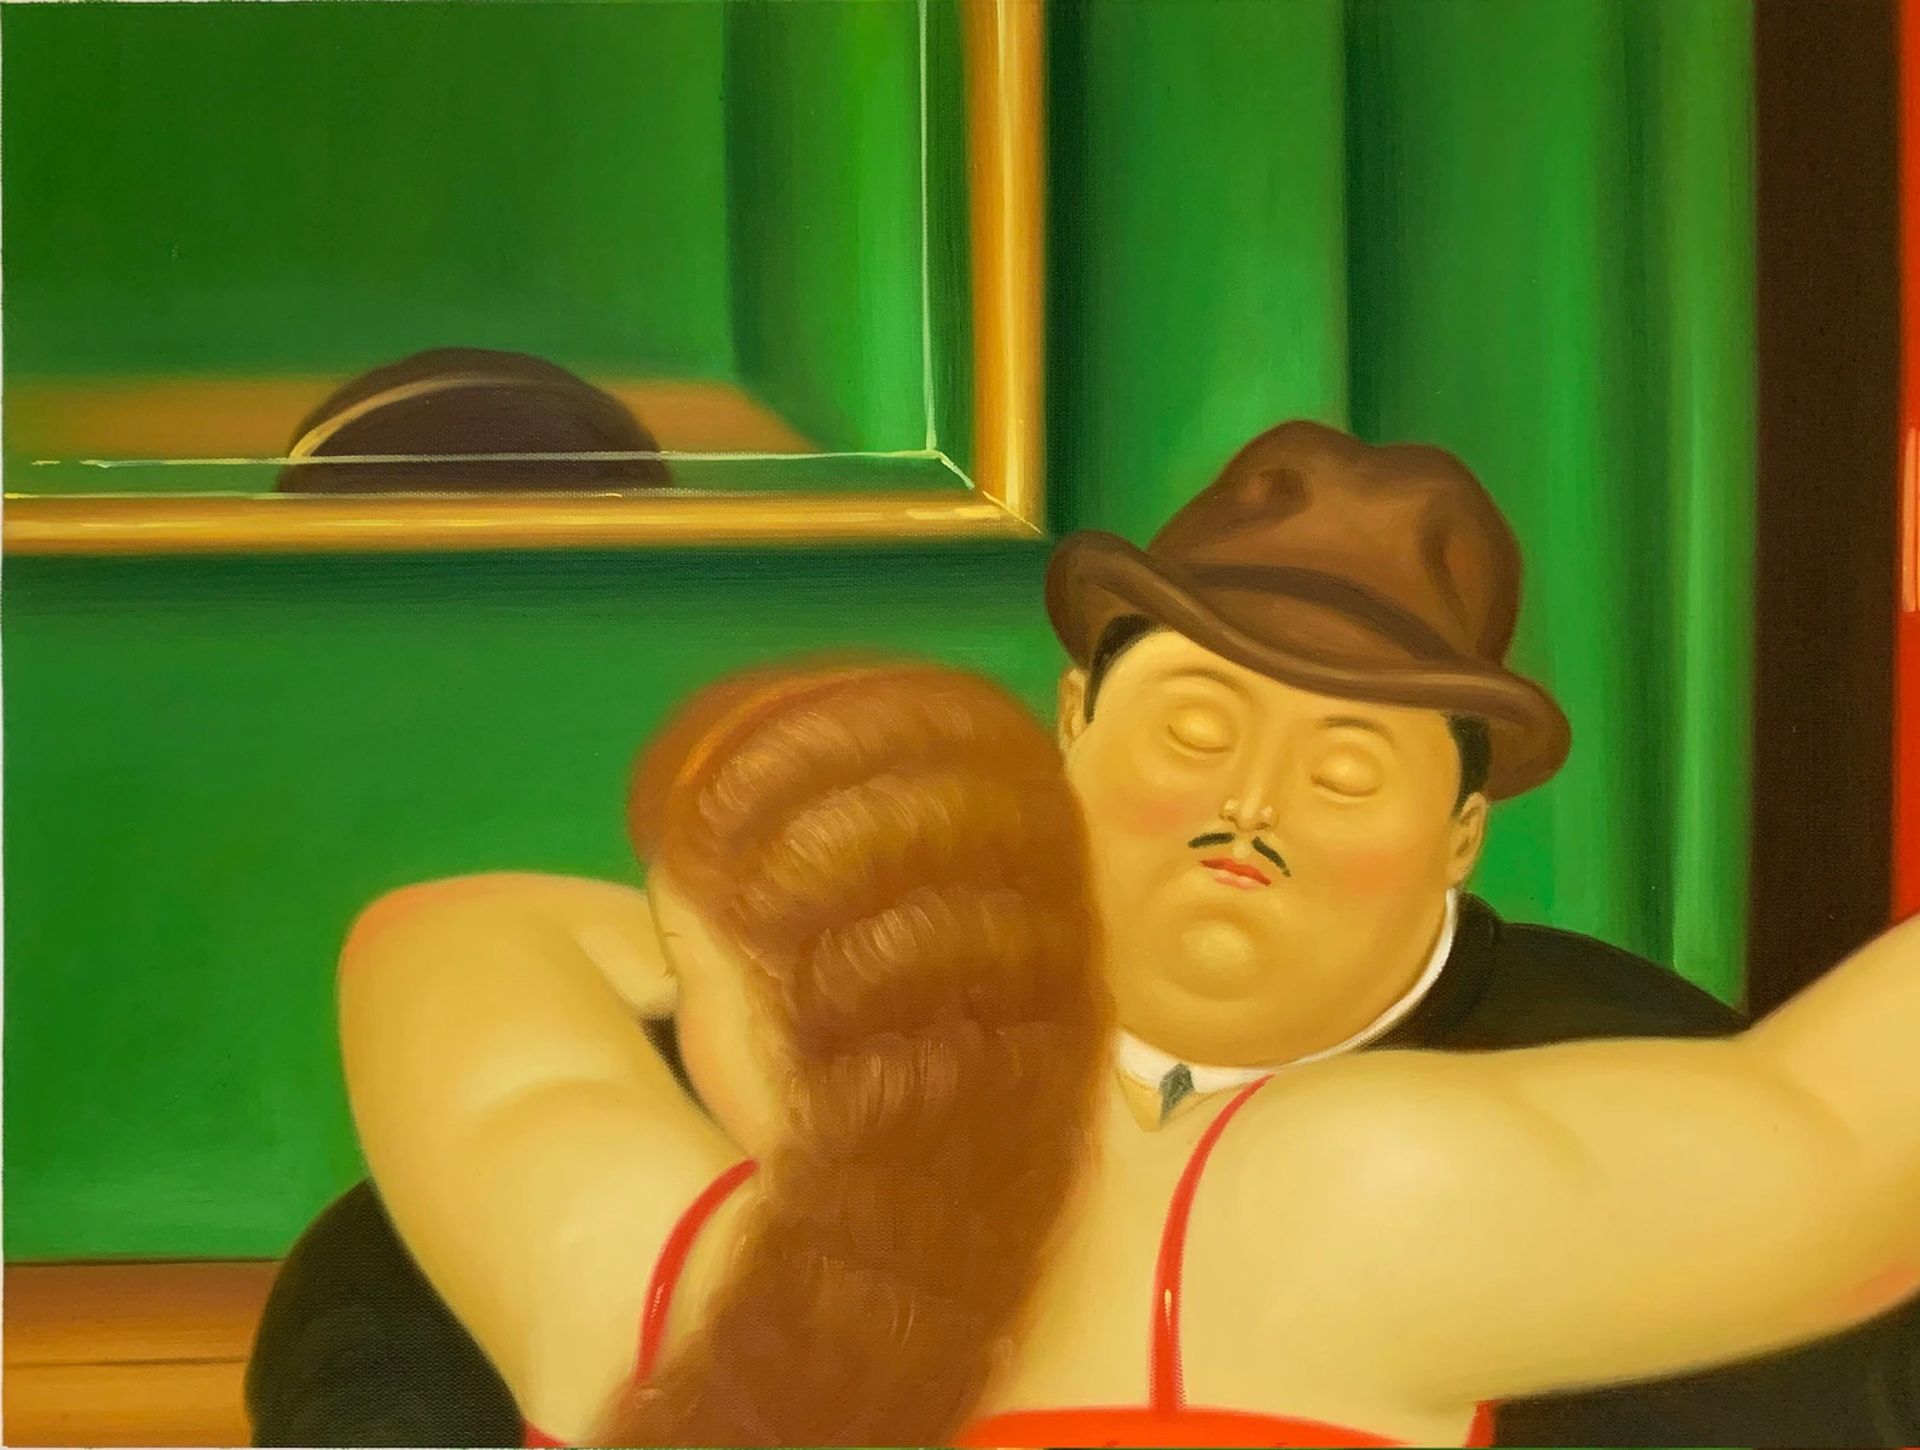 Fernando Botero "Couple Dancing" Oil Painting - Image 2 of 2